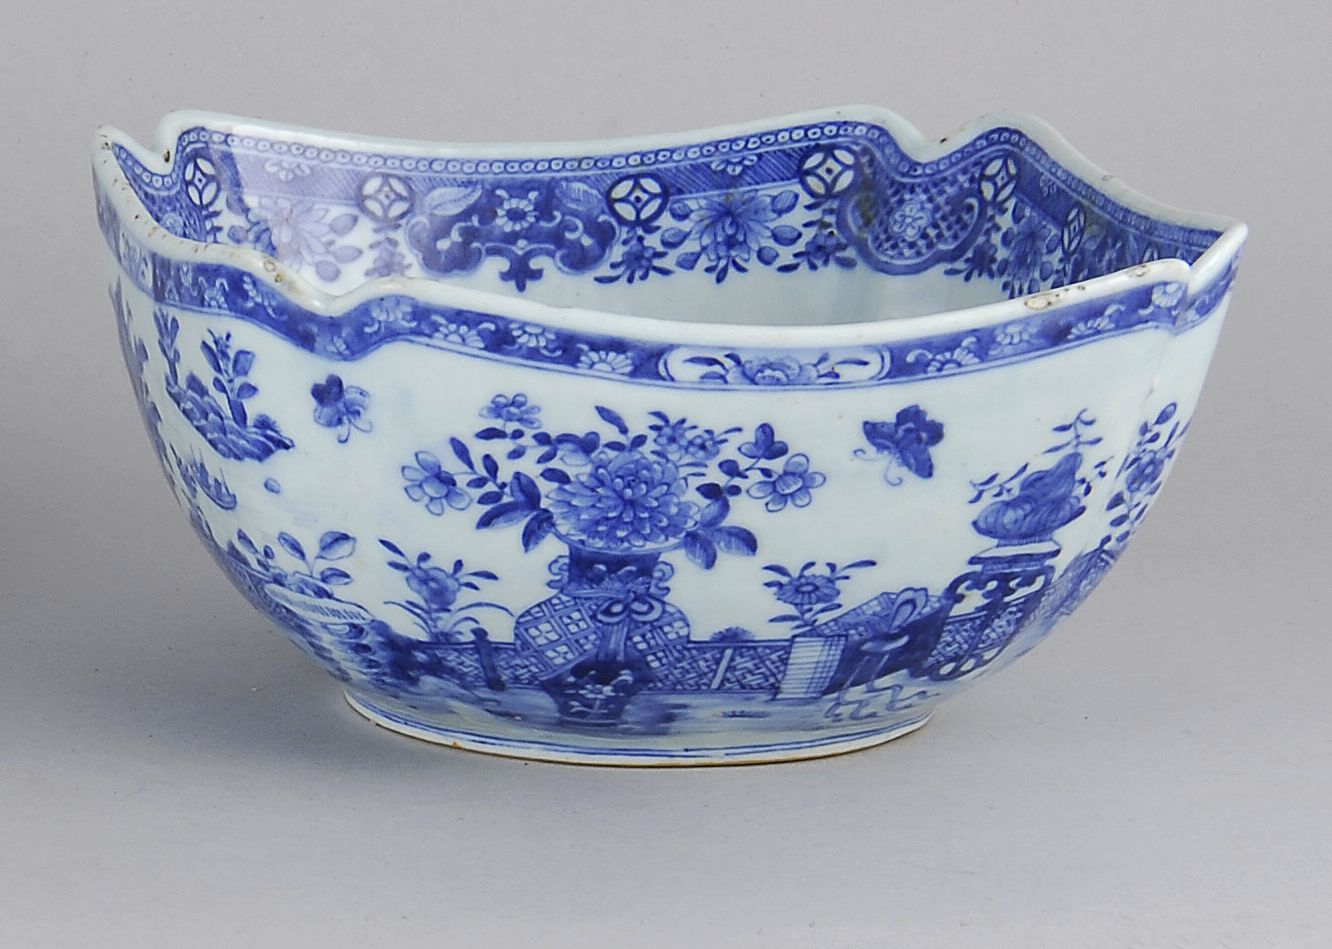 CHINESE EXPORT BLUE AND WHITE PORCELAIN 14a8cb